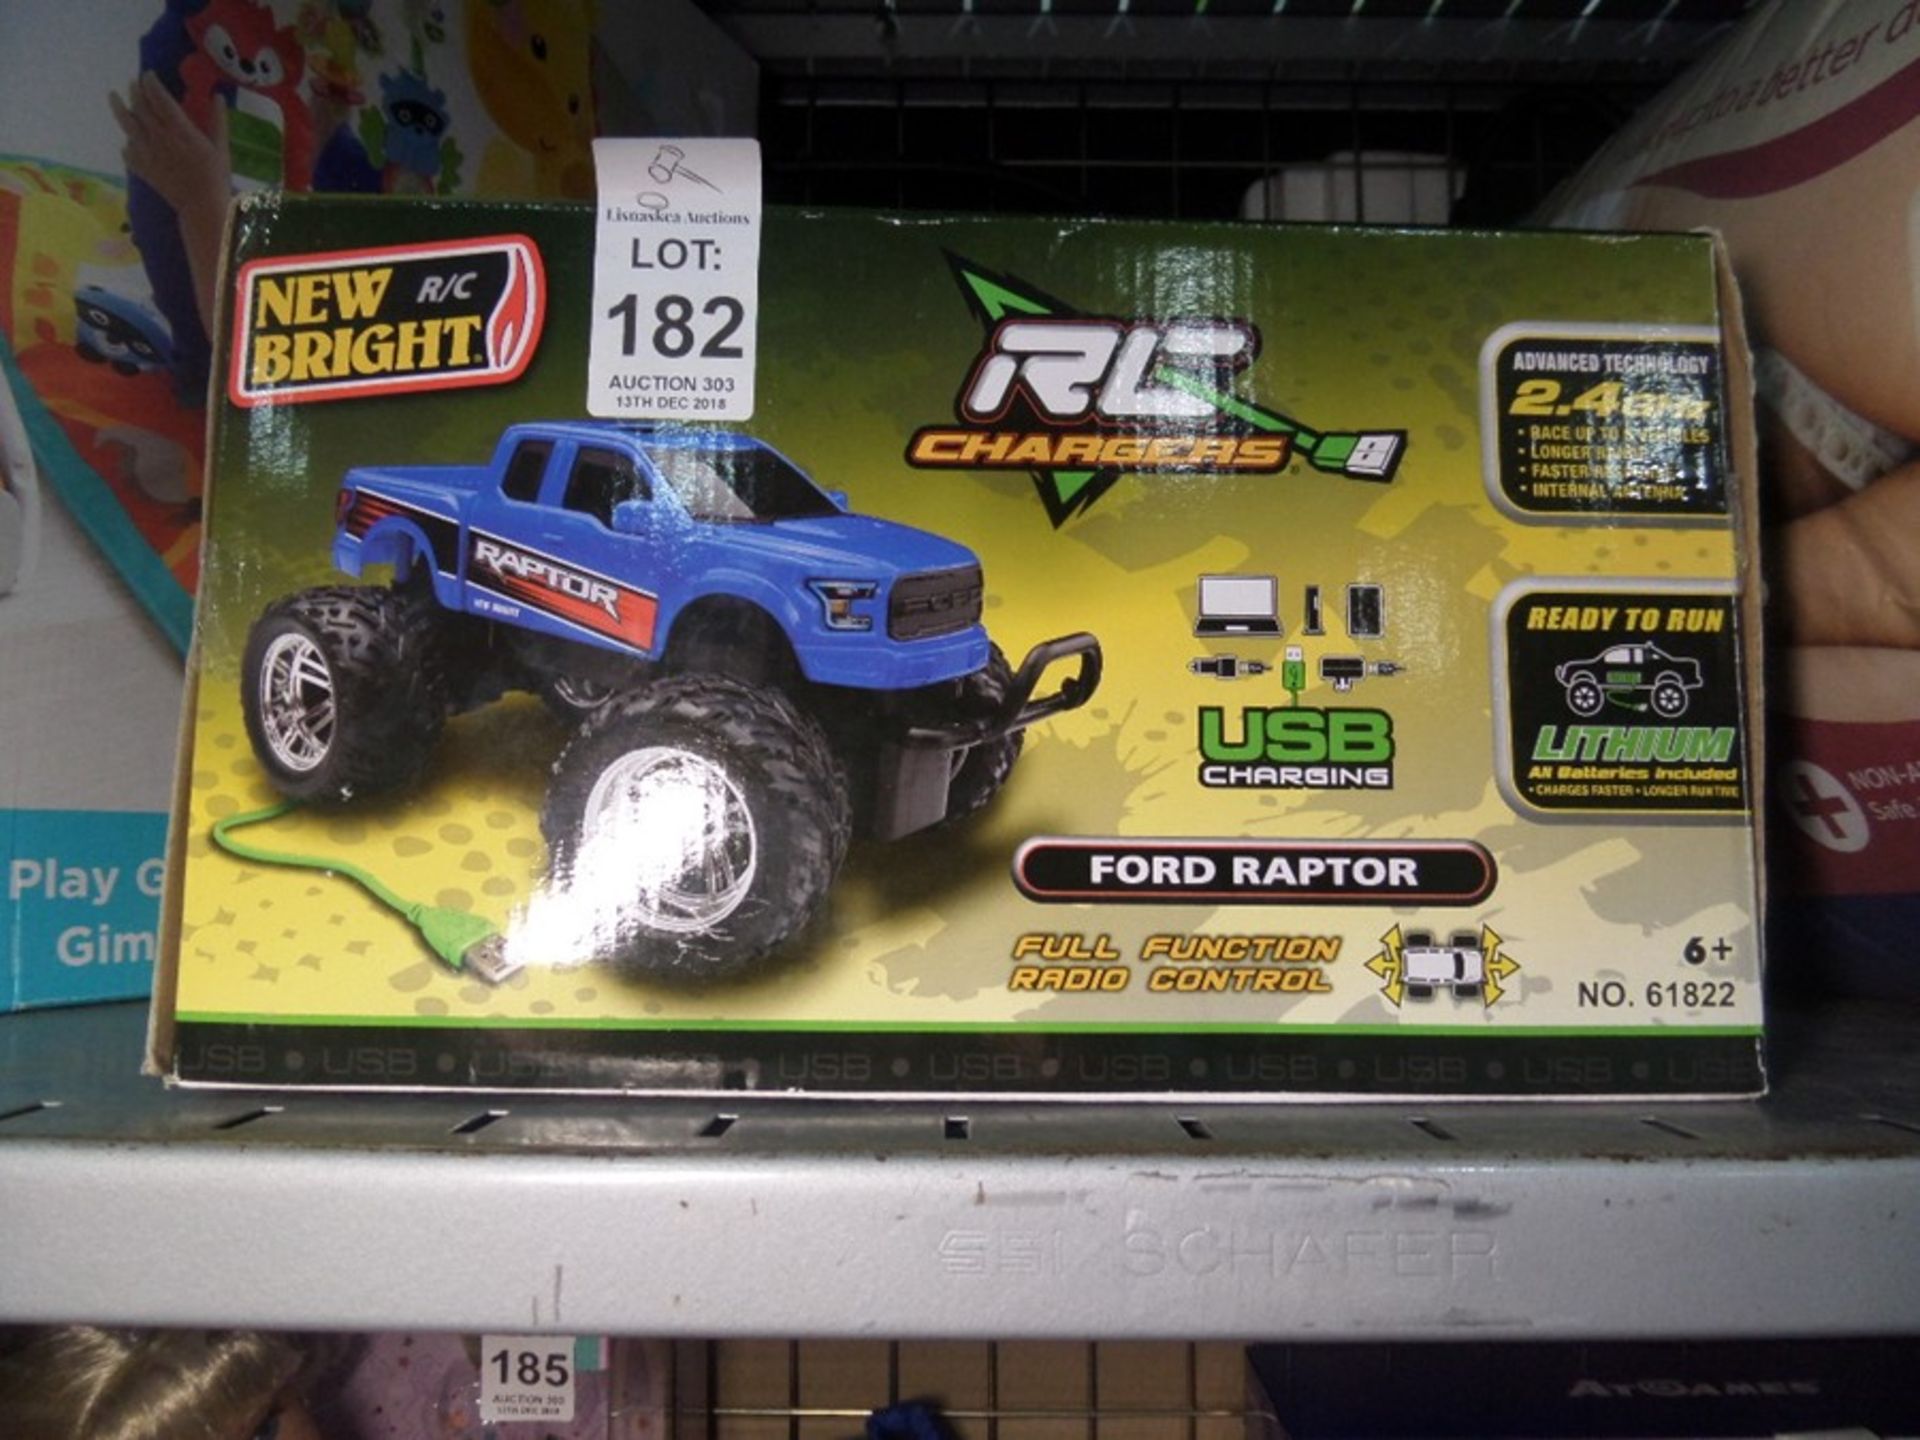 NEW R/C BRIGHT FORD RAPTOR TOY SHOP CLEARANCE